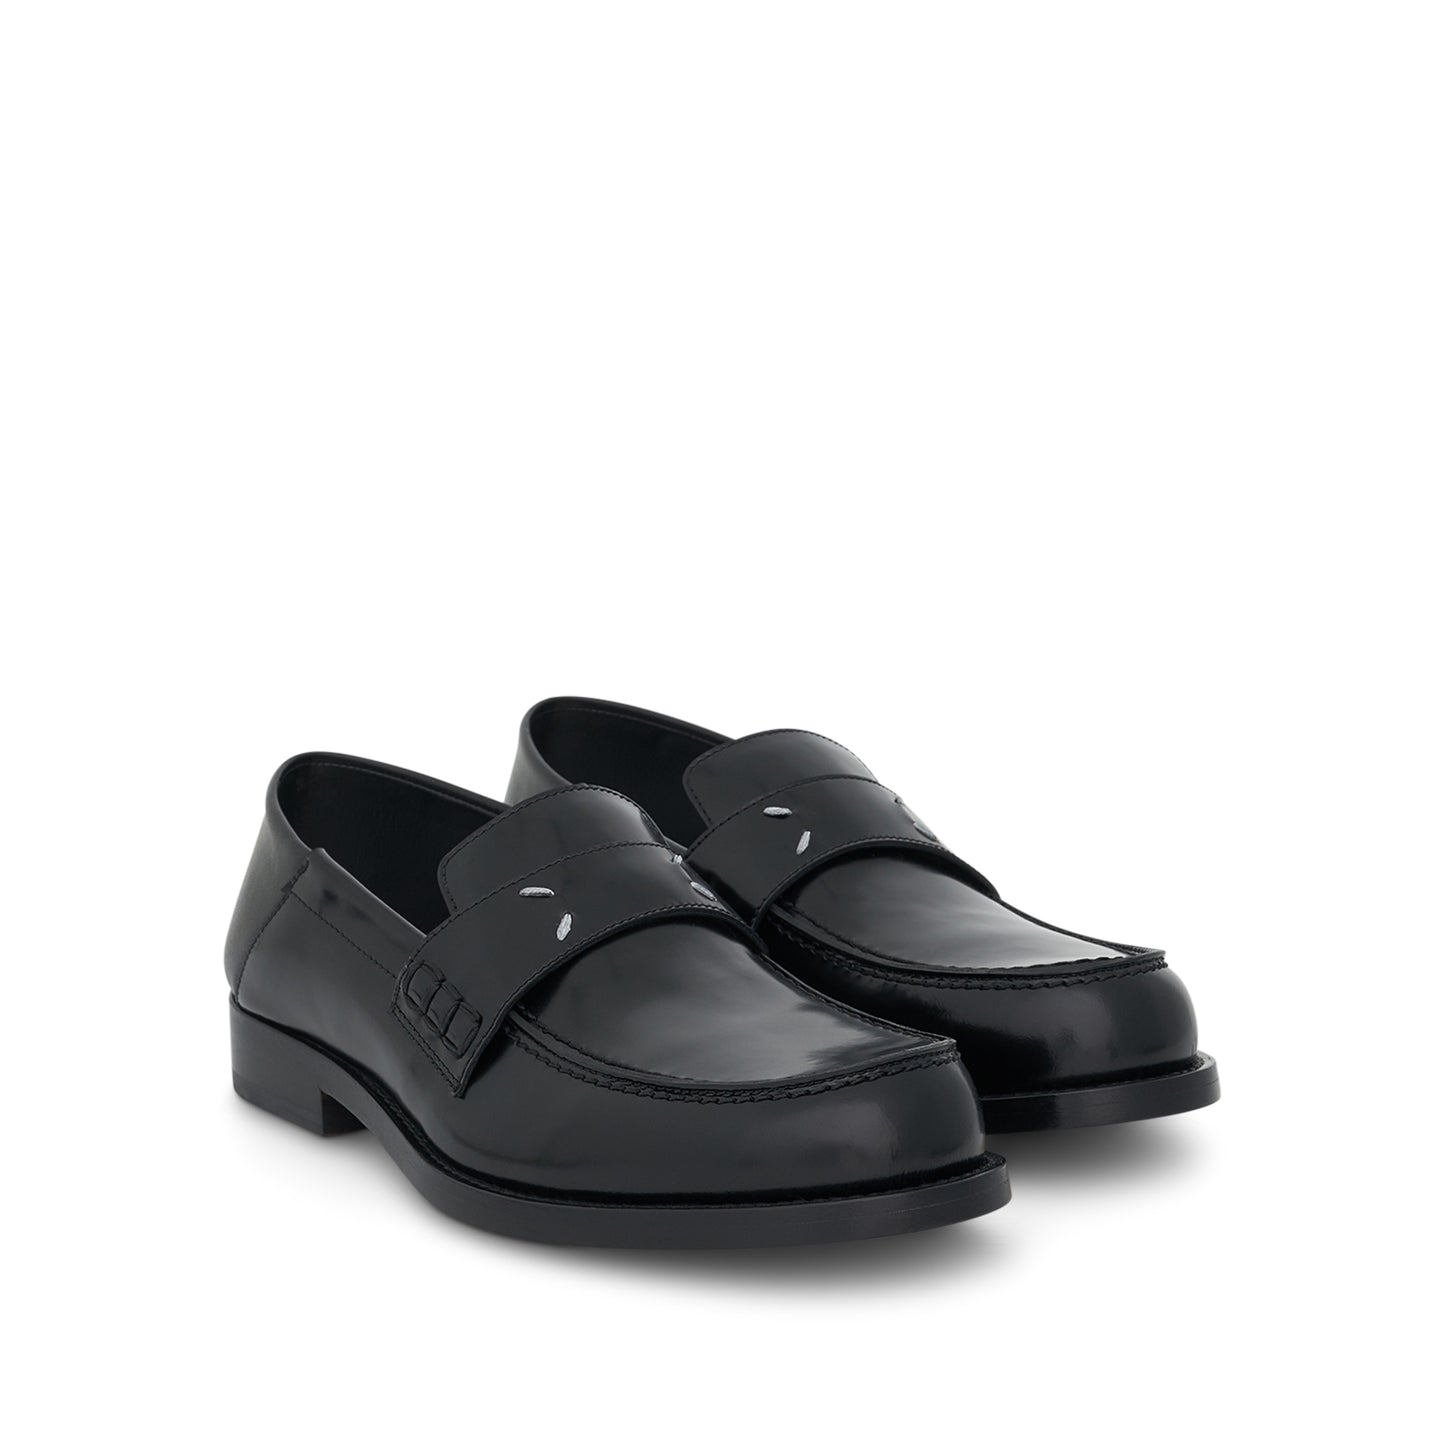 Four Stitch Round Toe Loafer in Black